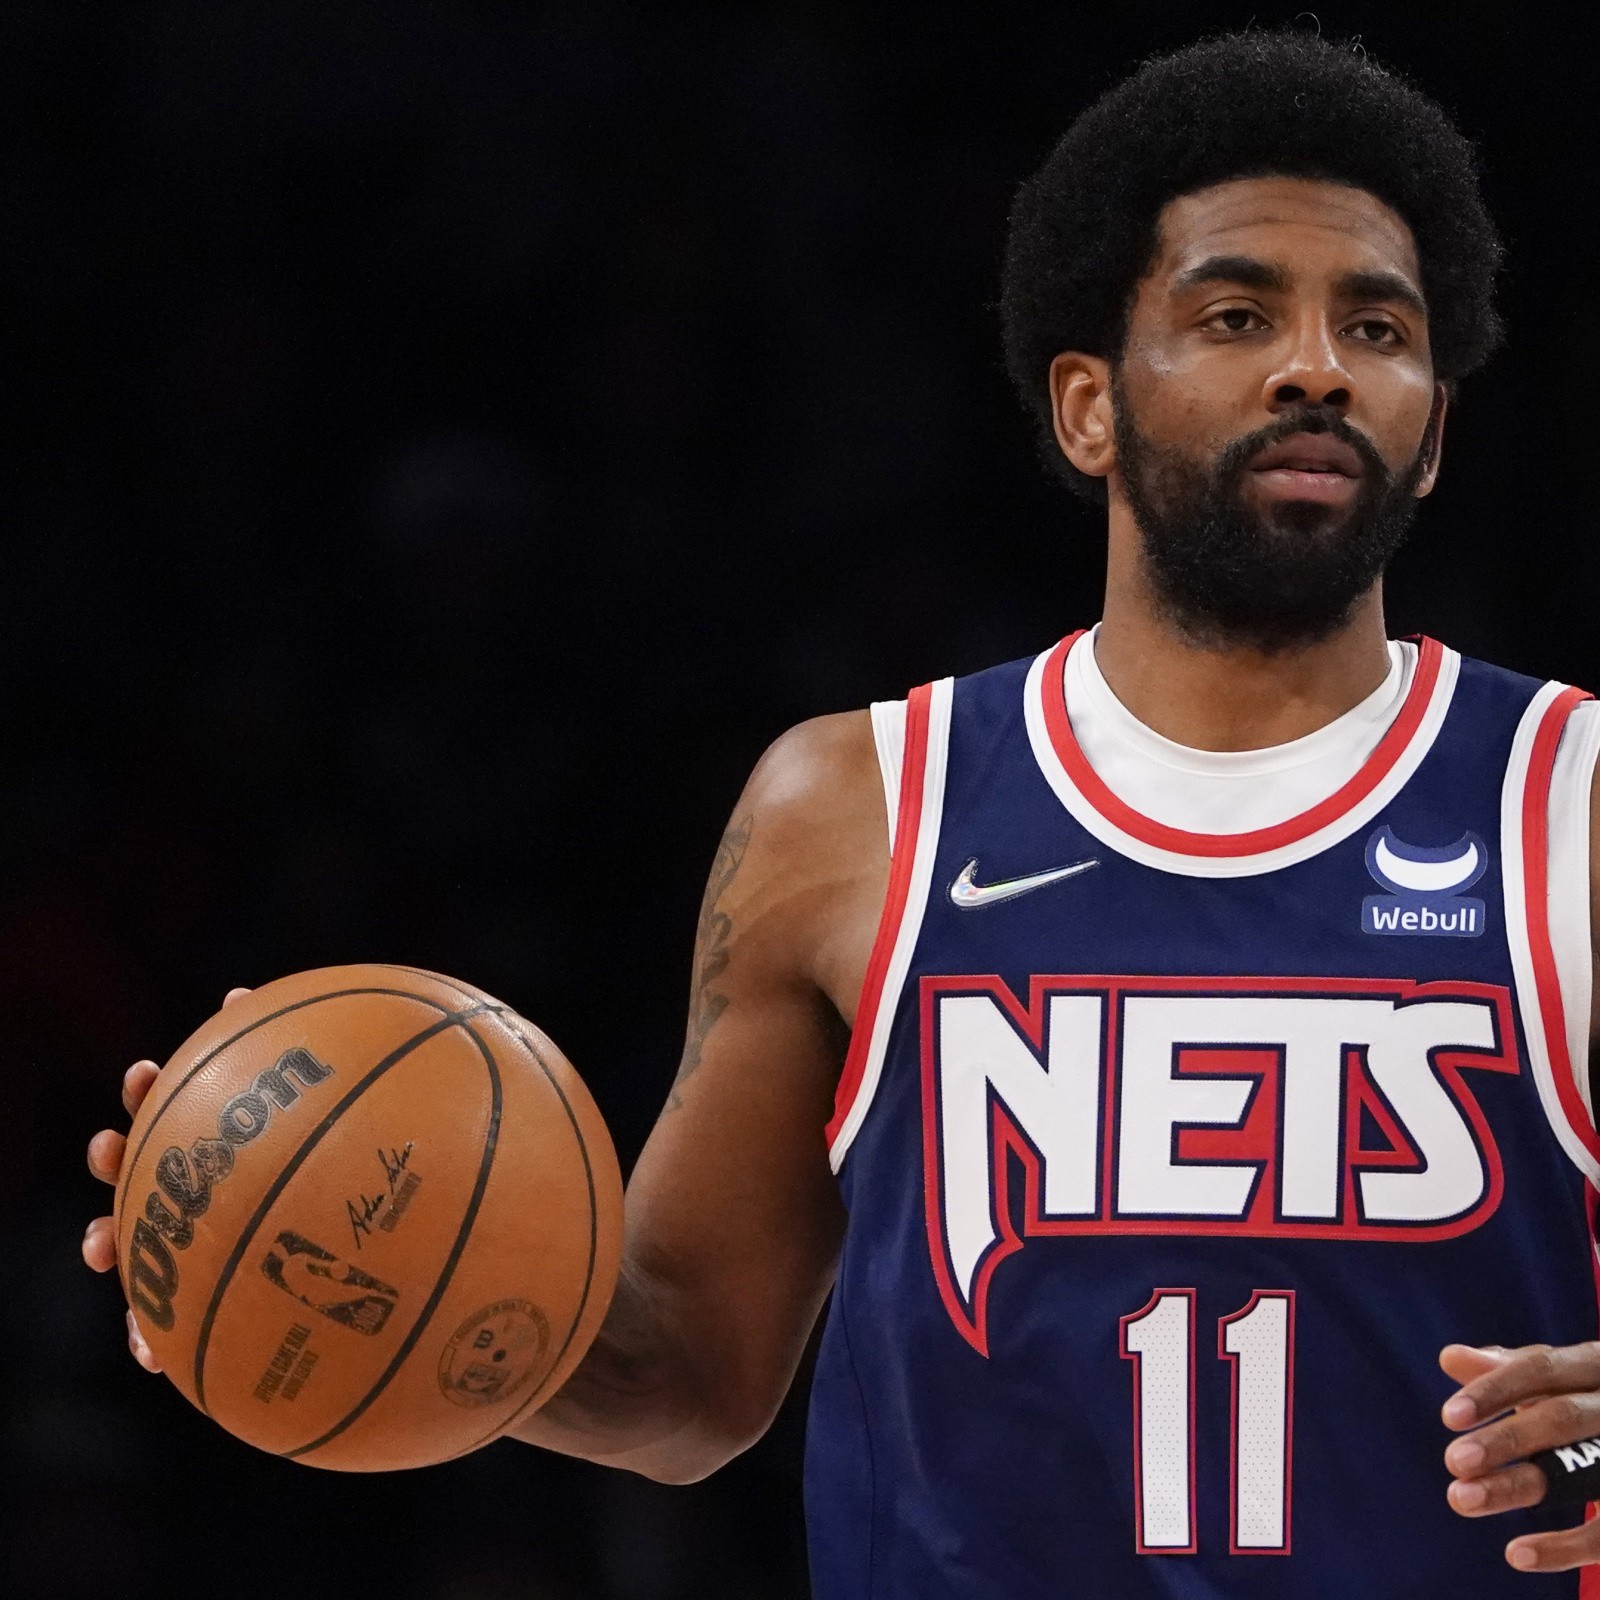 Nike unlikely to extend signature shoe deal with Nets' Kyrie